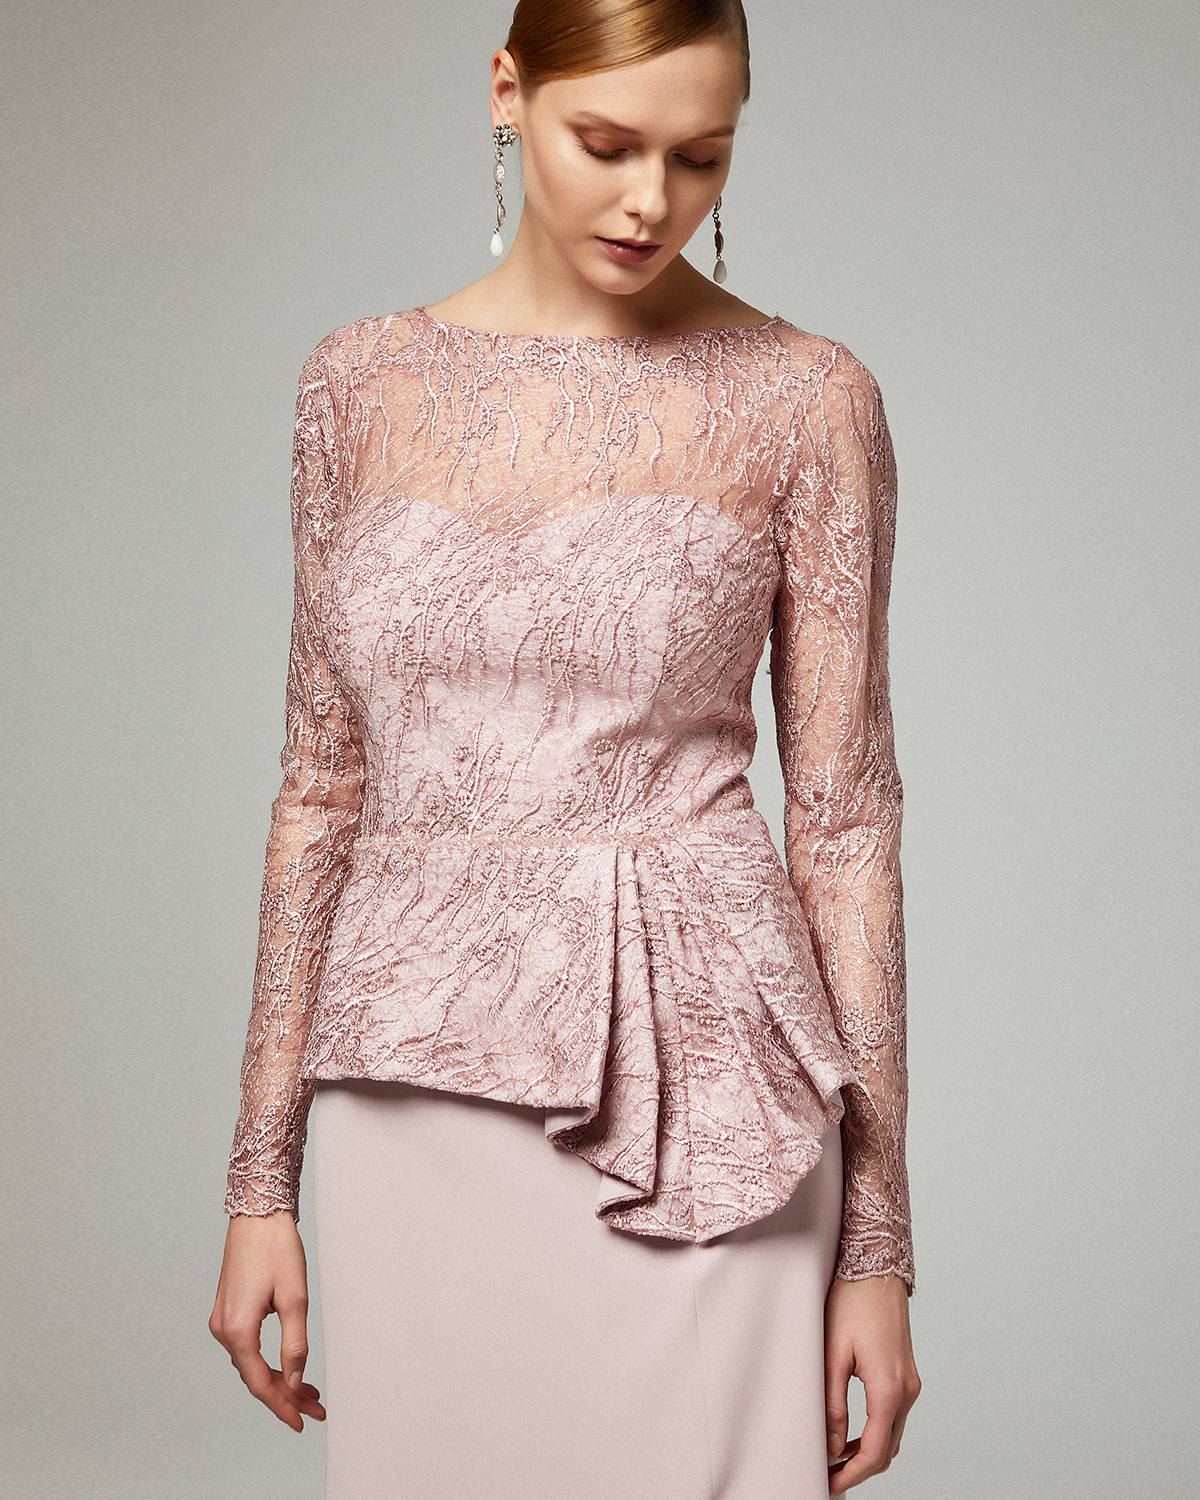 Classic Dresses / Long evening dress with lace top and long sleeves for the mother of the bride